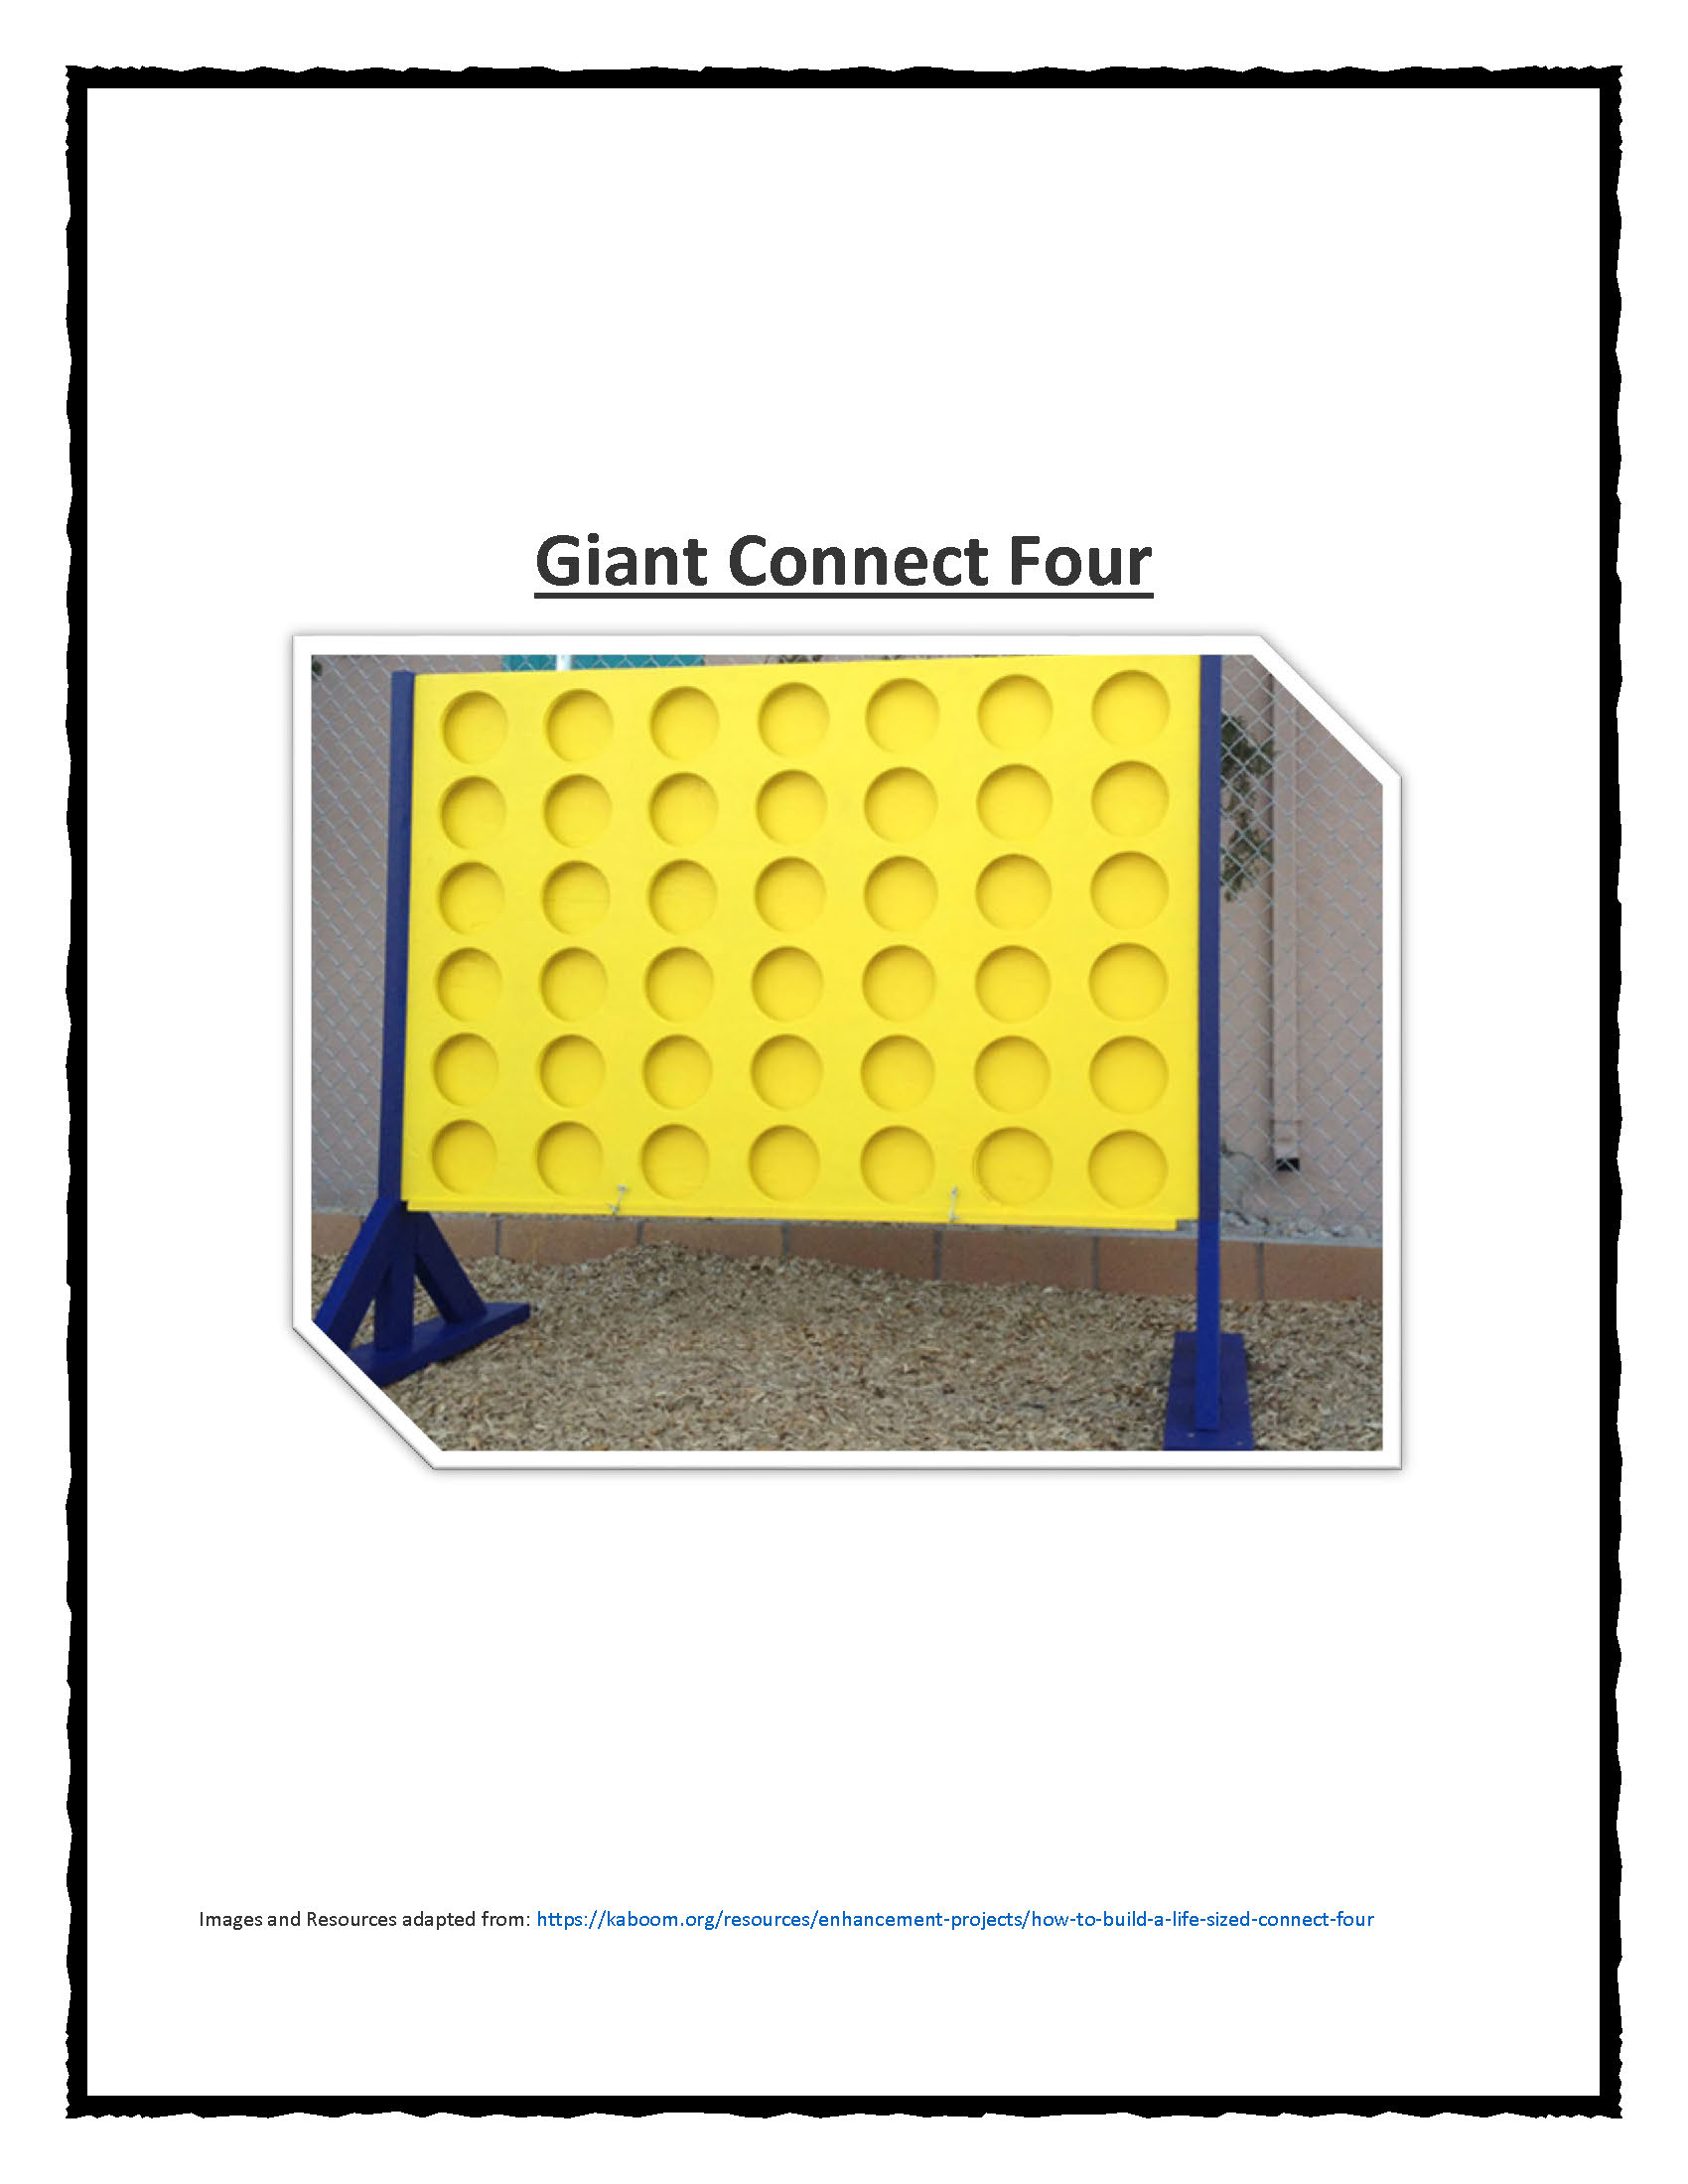 Click here to open the Giant Connect Four PDF in English.